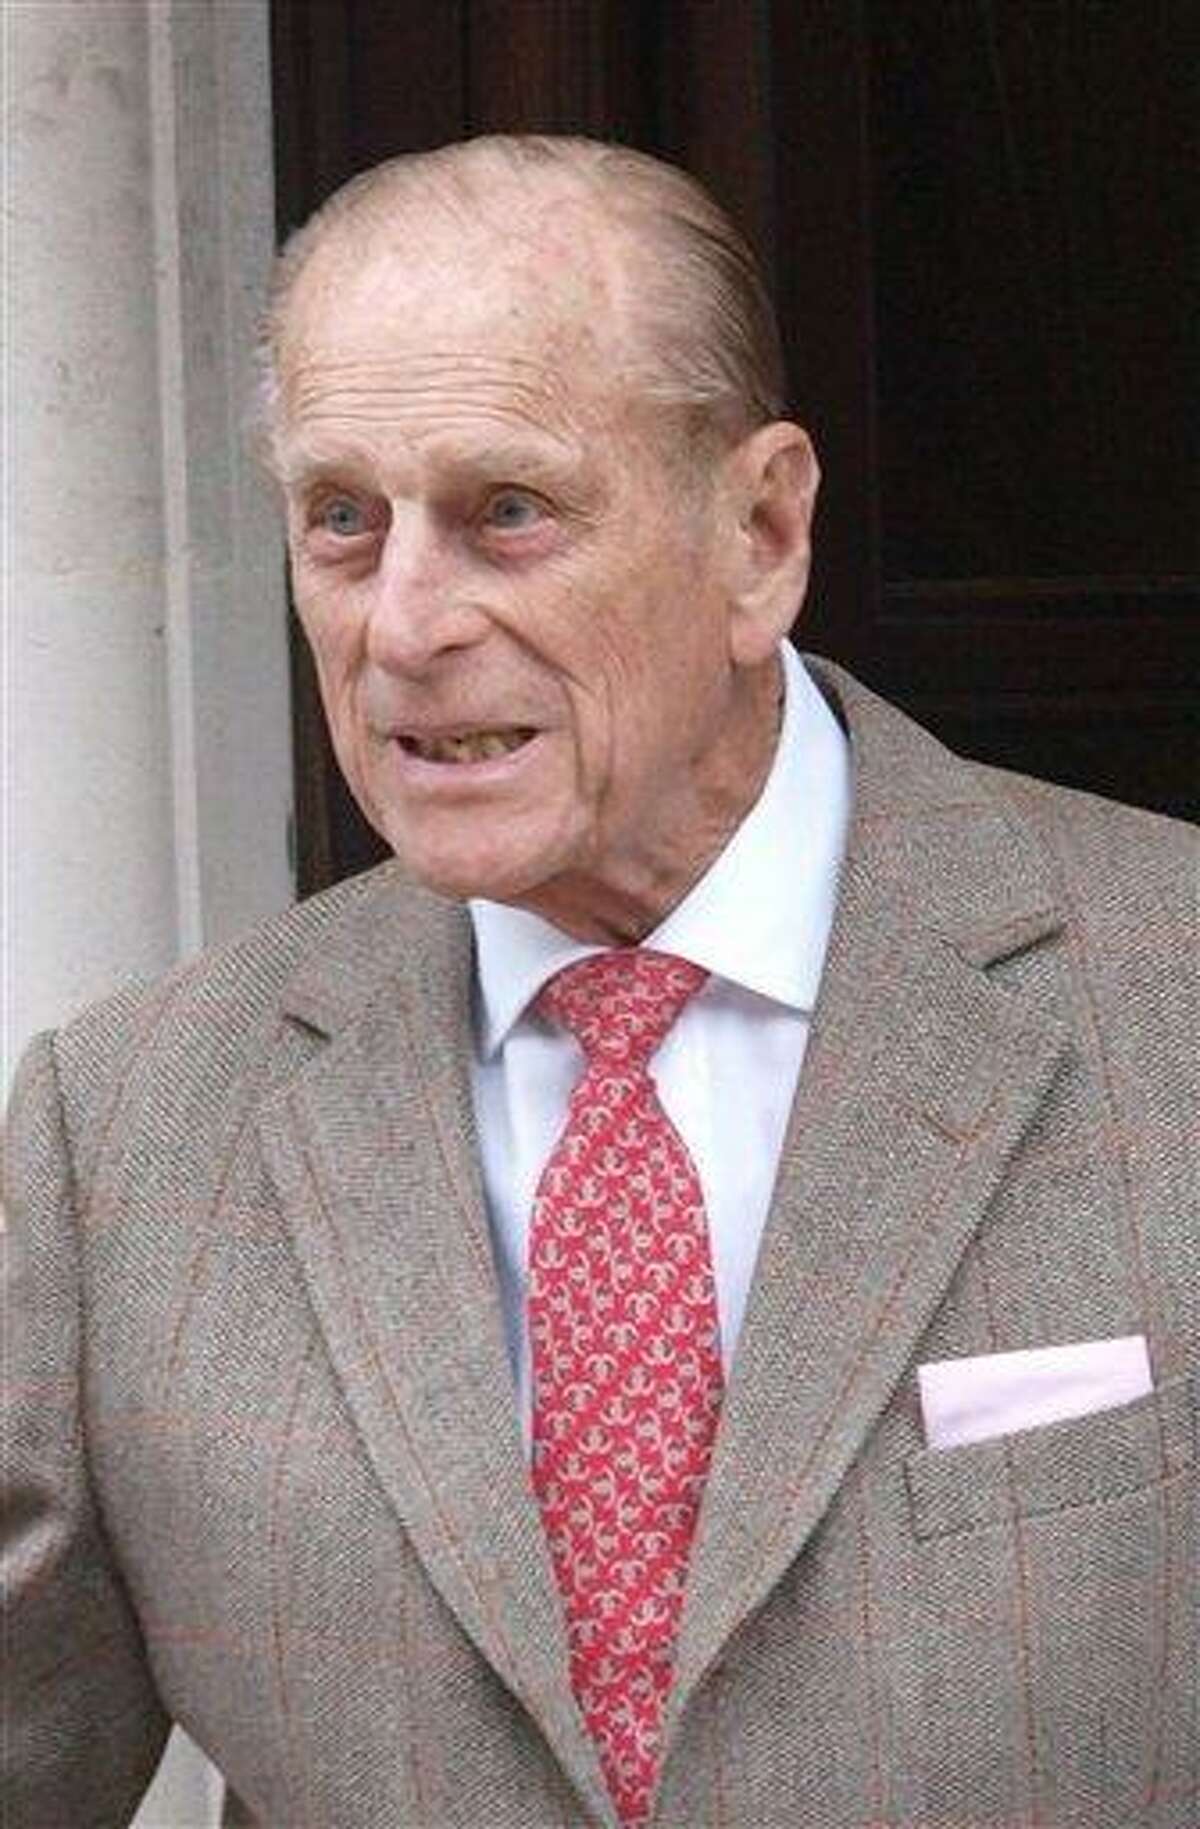 Prince Philip, Duke of Edinburgh, leaves King Edward VII Hospital in central London Saturday after being treated for a bladder infection. The duke will celebrate his 91st birthday Sunday privately with members of the family. On Friday he enjoyed the company of grandsons the Duke of Cambridge and Prince Harry who paid a short, private visit to the hospital. Associated Press